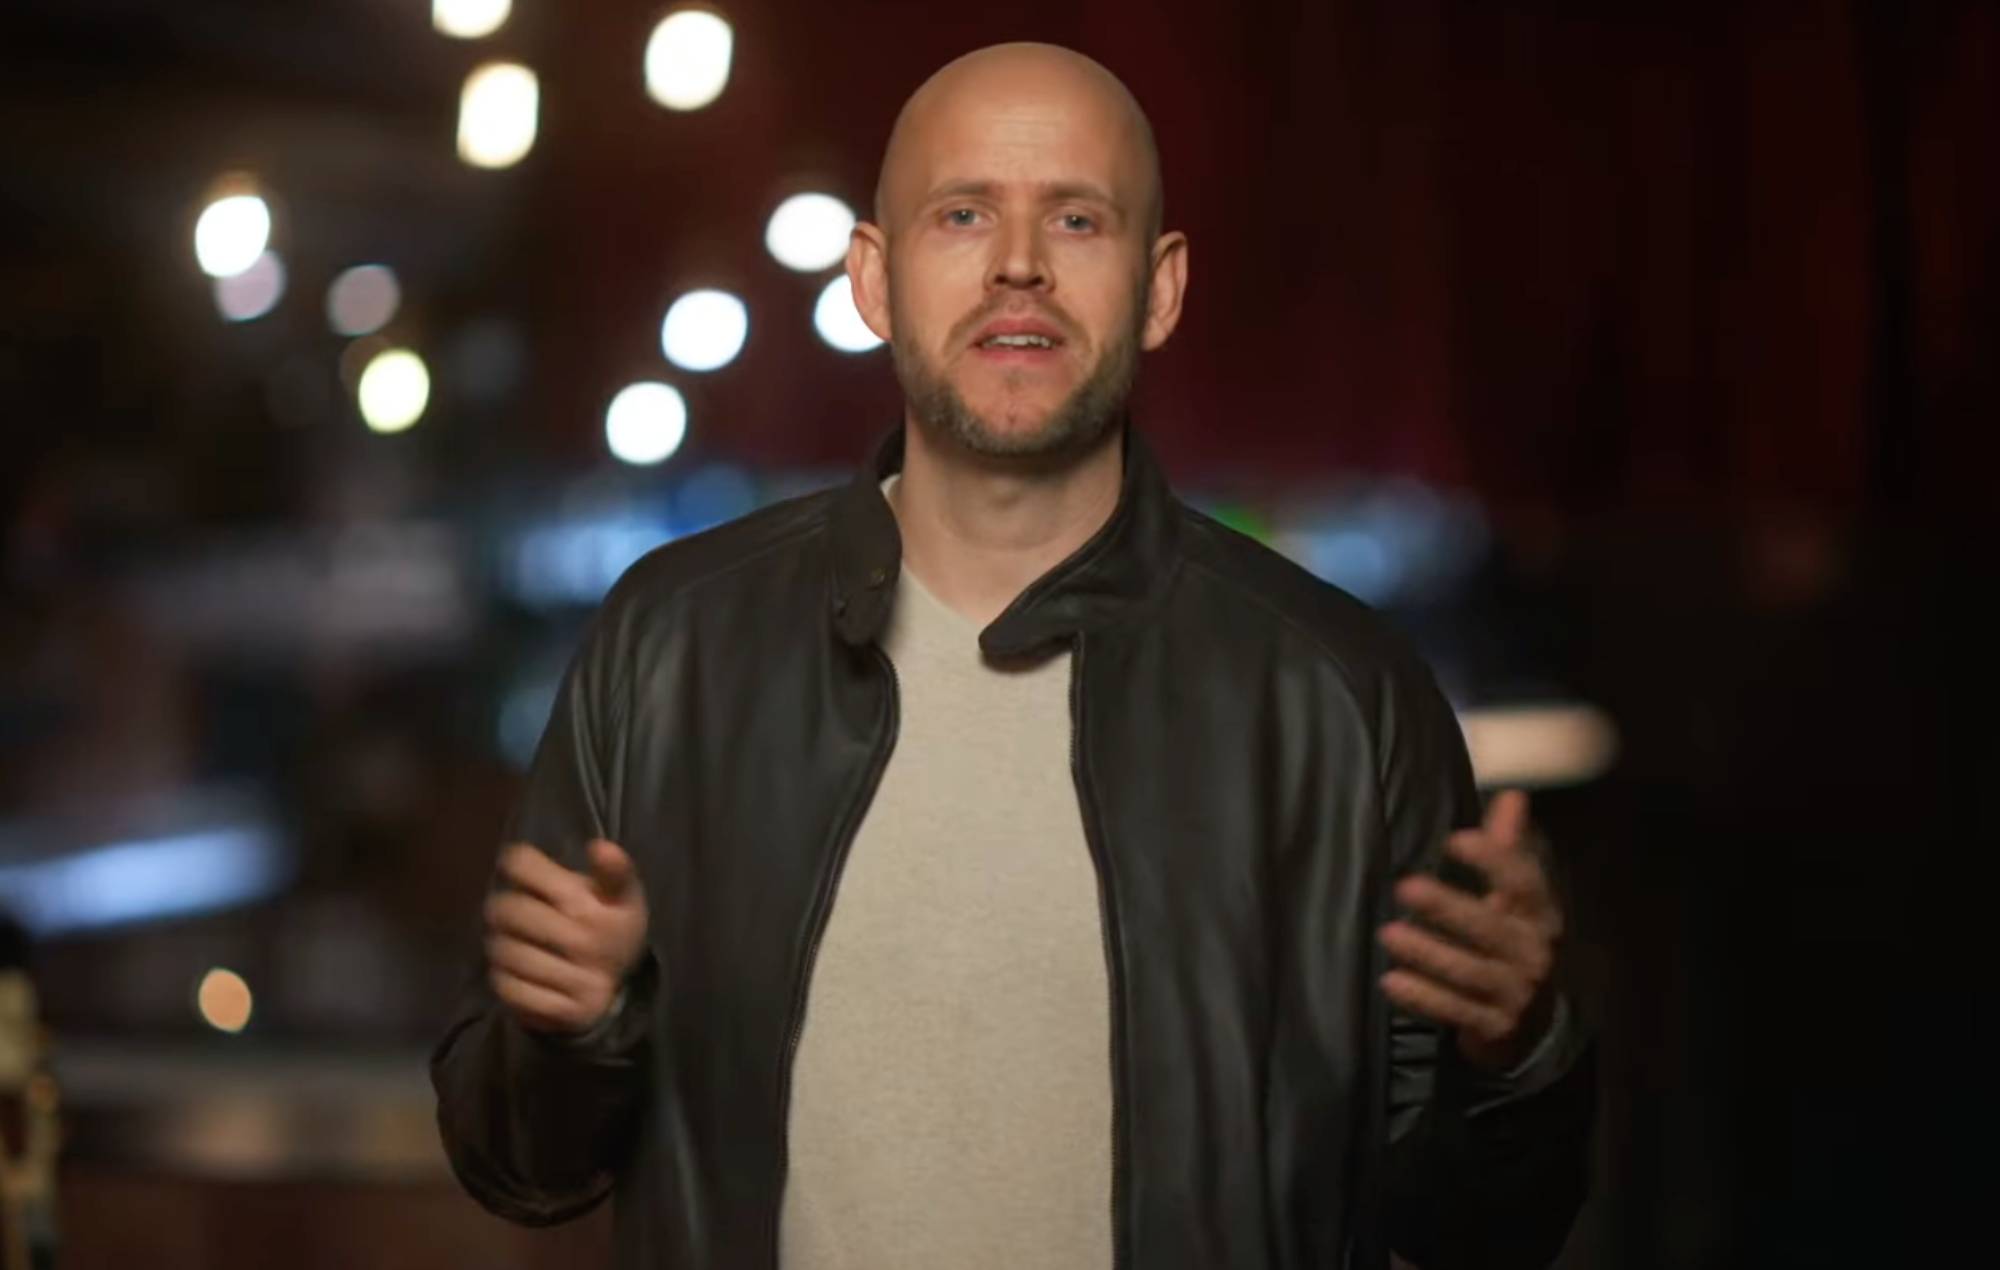 The Spotify Co-Founder Makes a 'Insane' $1 Billion Bet on Early Tech